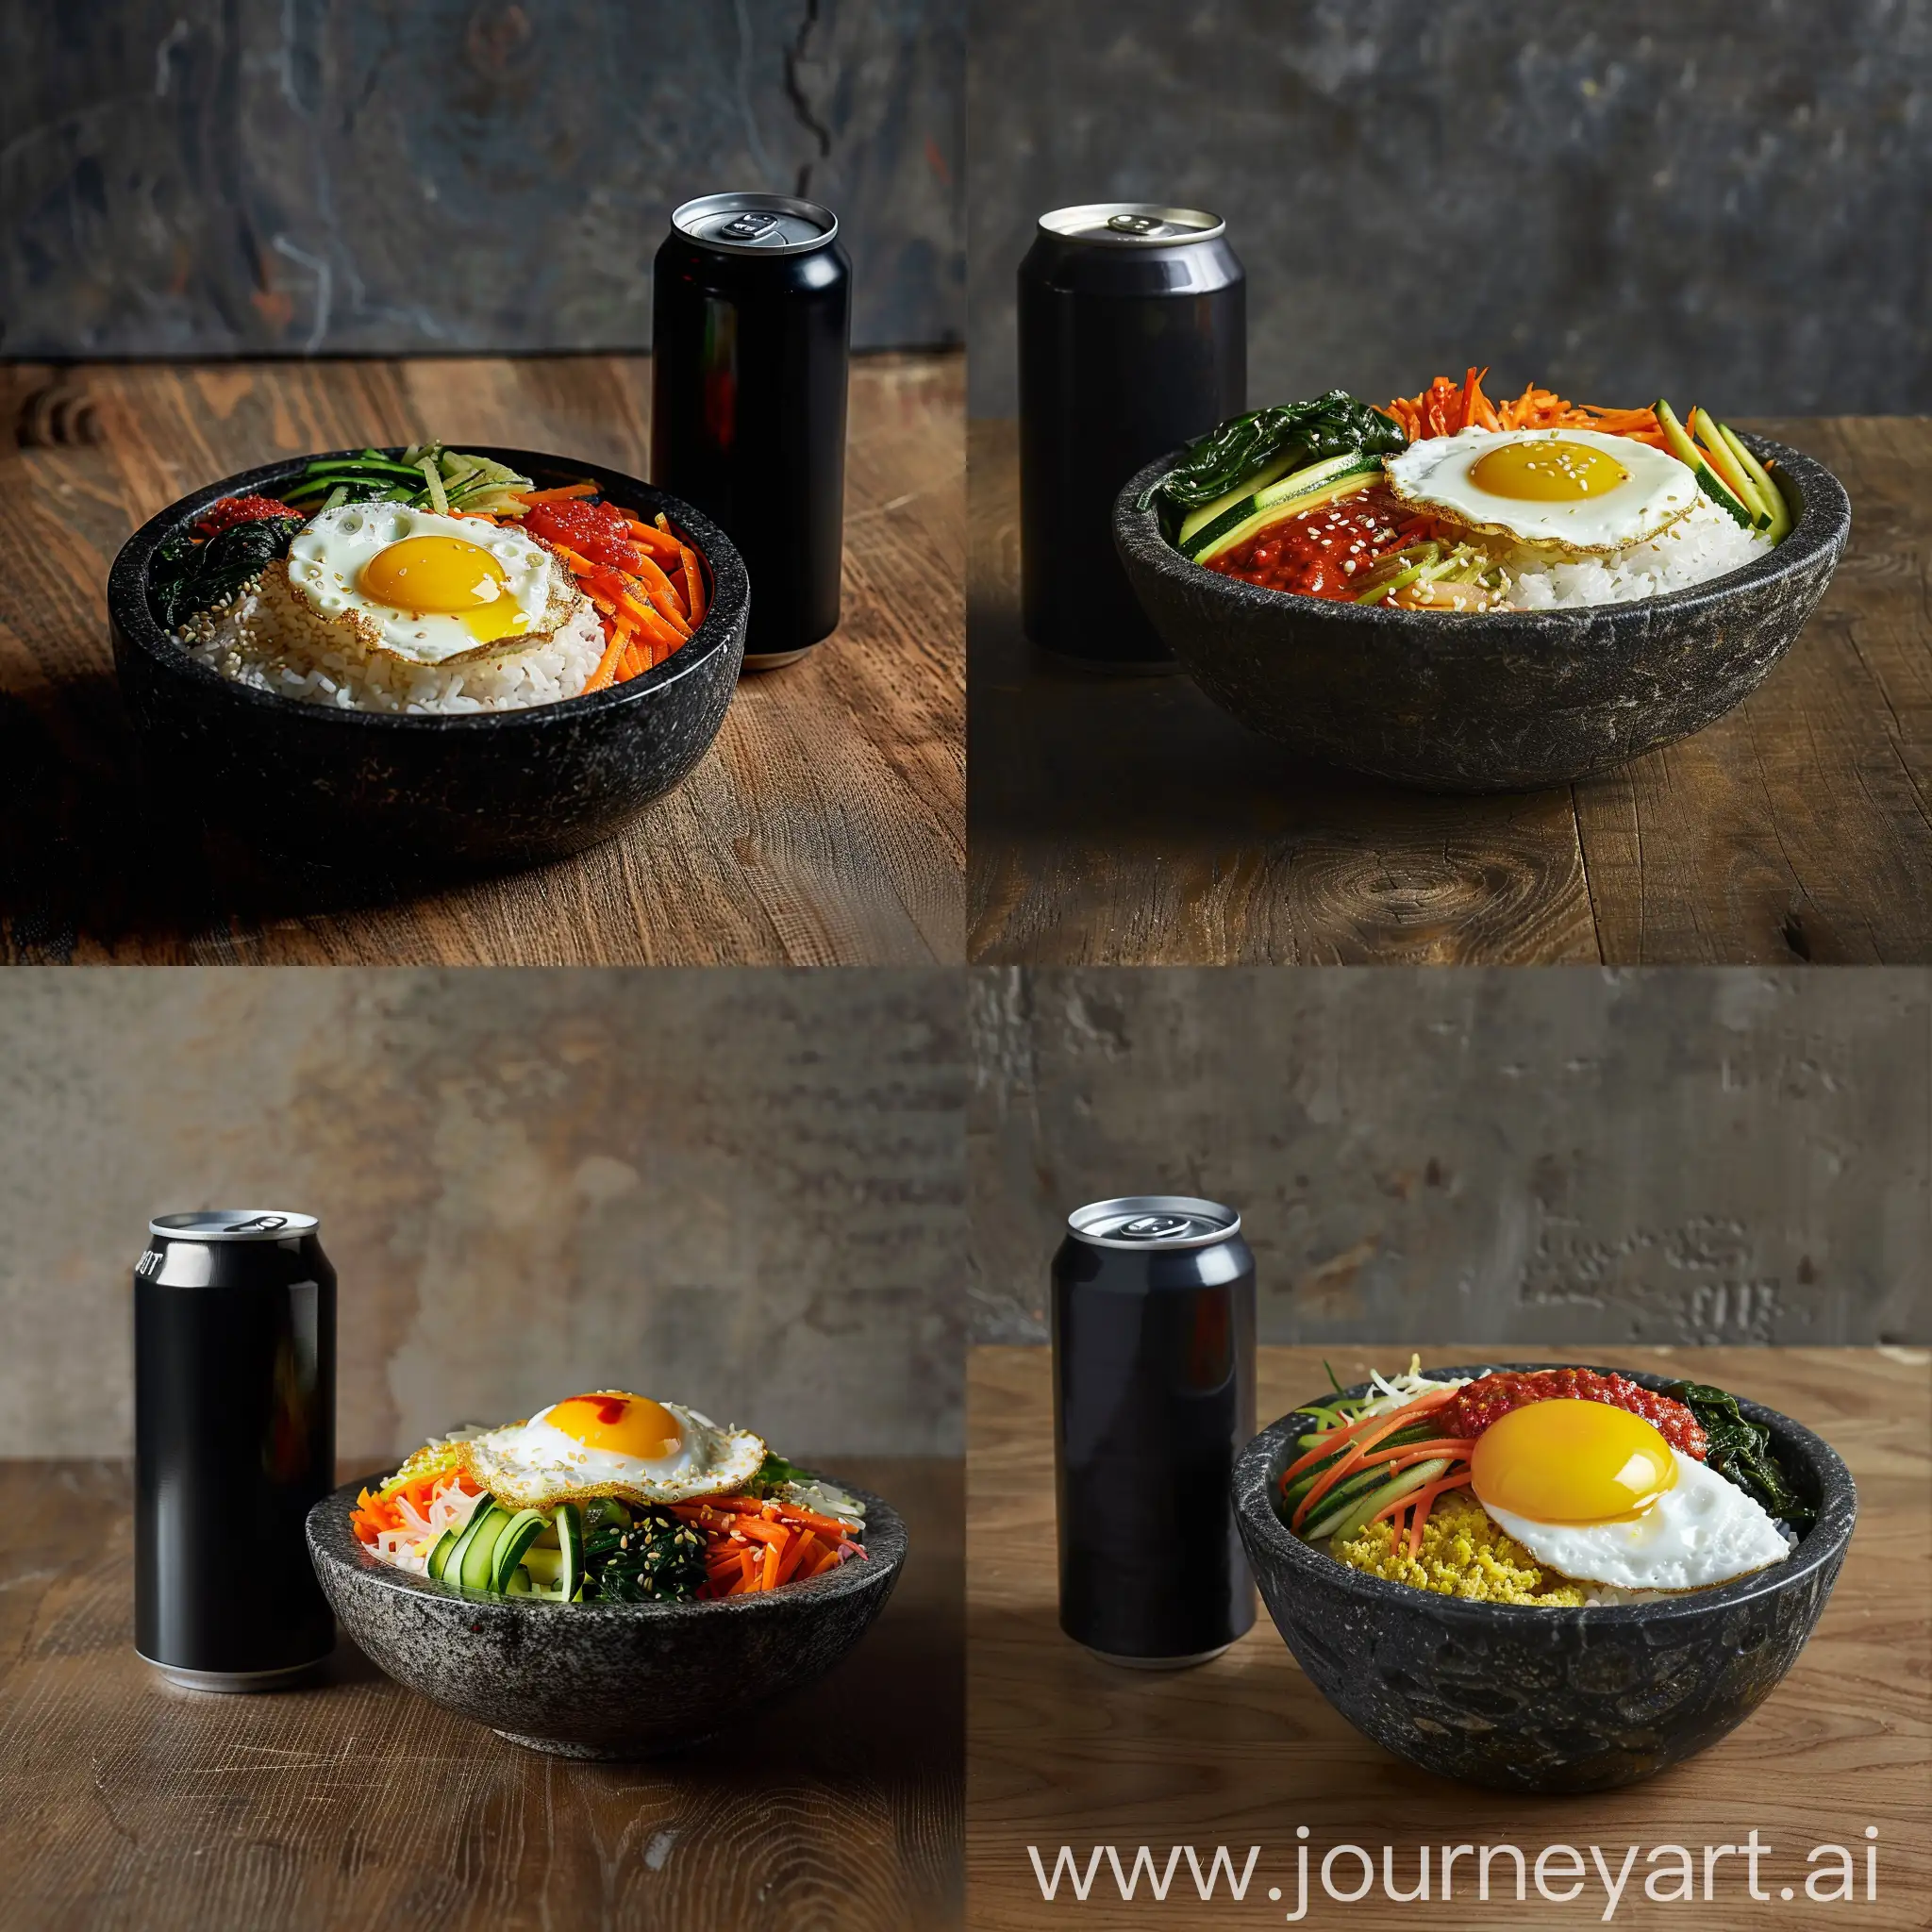 Bibimbap-Bowl-with-Soft-Drink-Vibrant-Korean-Rice-Dish-on-Wooden-Table